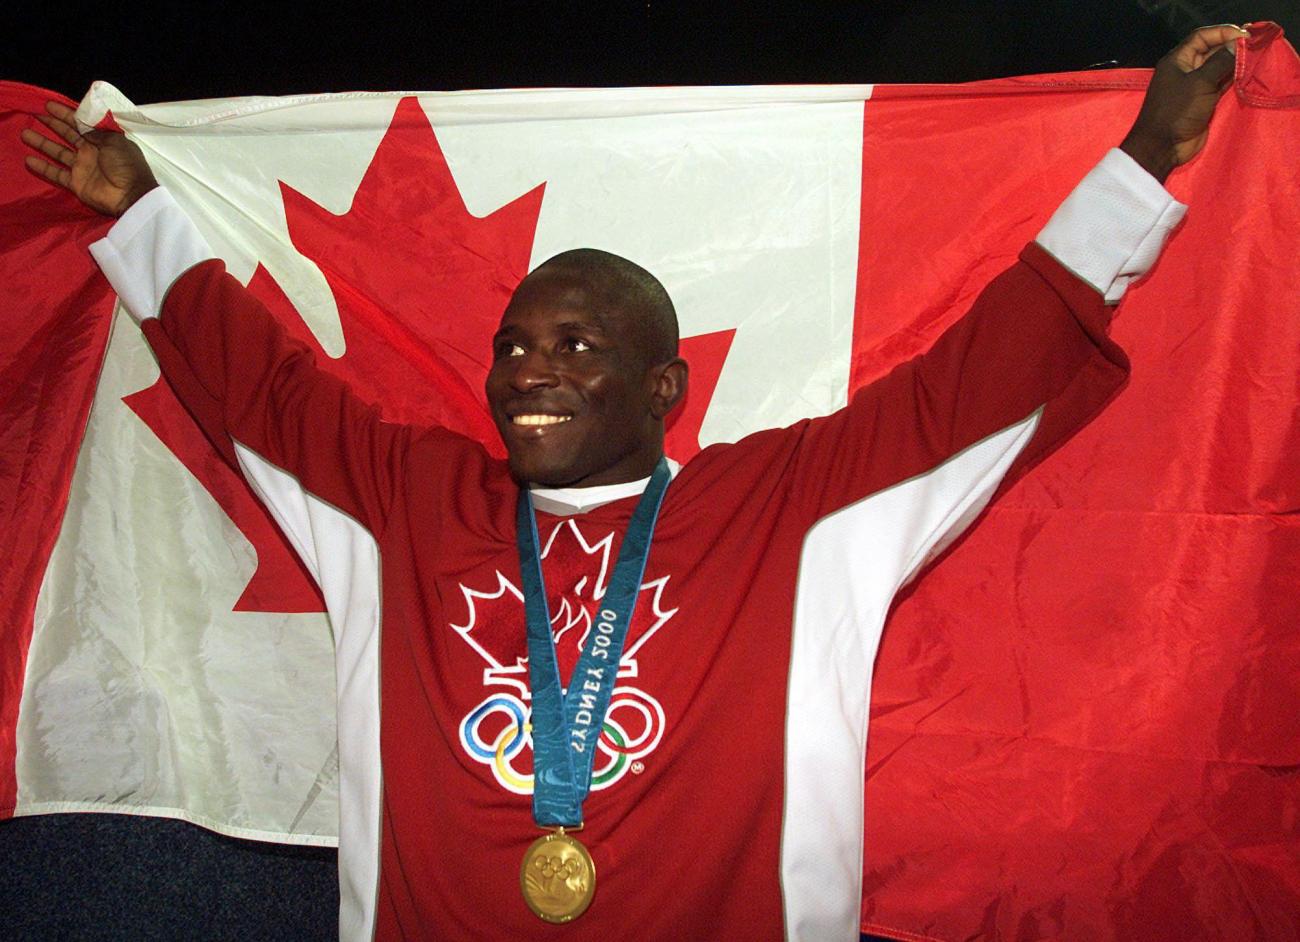 Daniel Igali dressed in red wearing a medal holding a Canadian flag behind him.